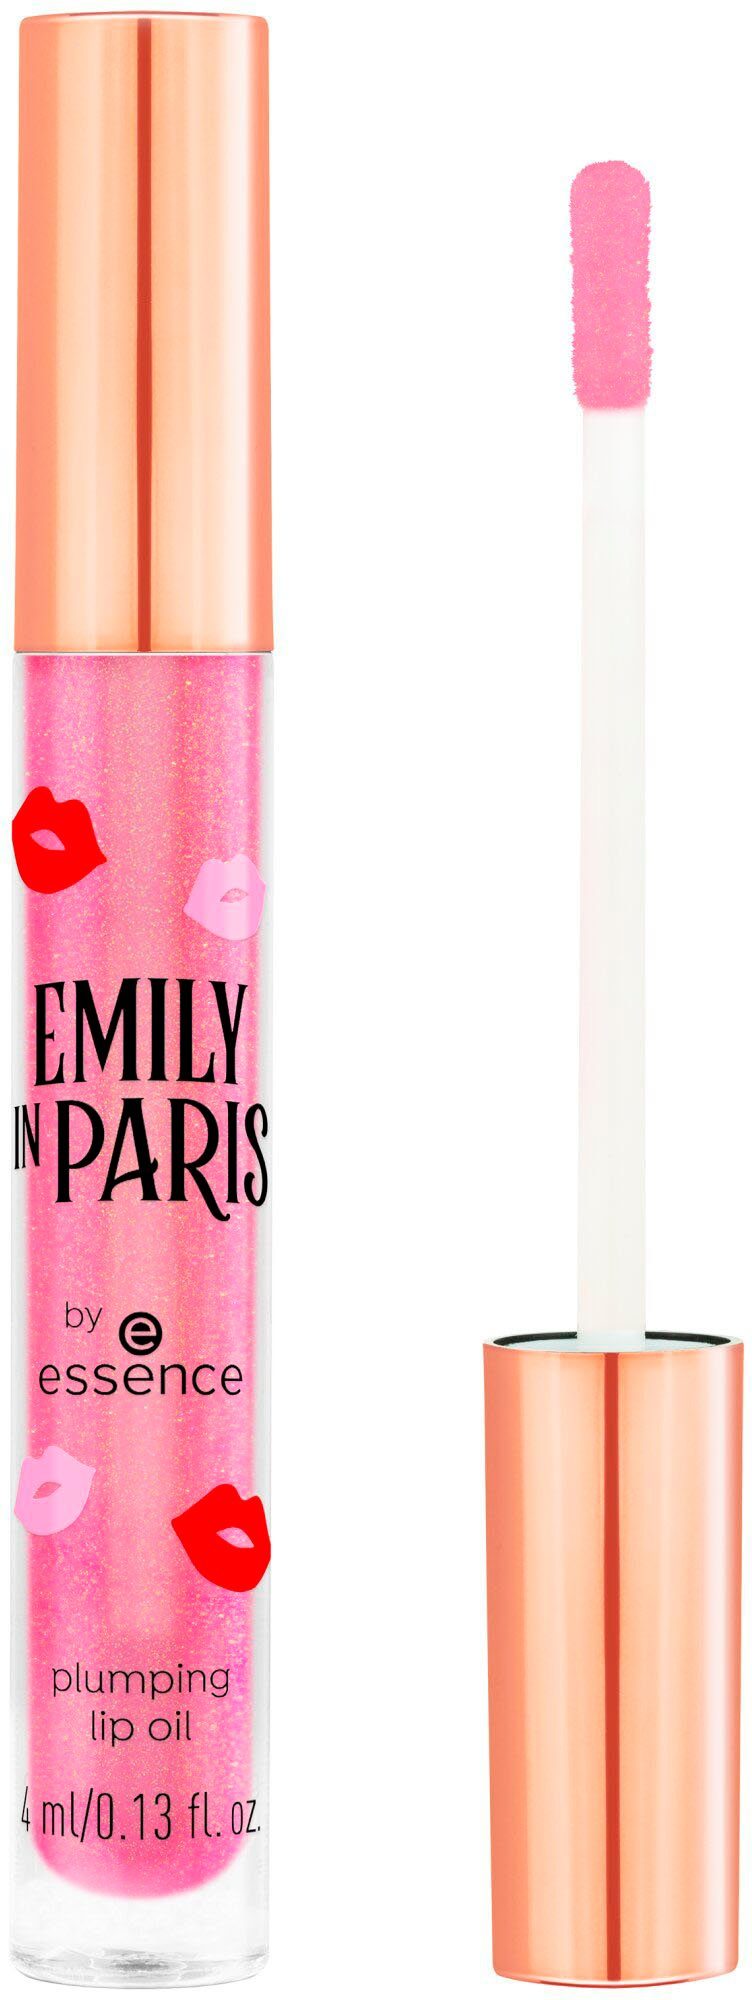 Essence Lipgloss IN PARIS essence by plumping EMILY lip oil